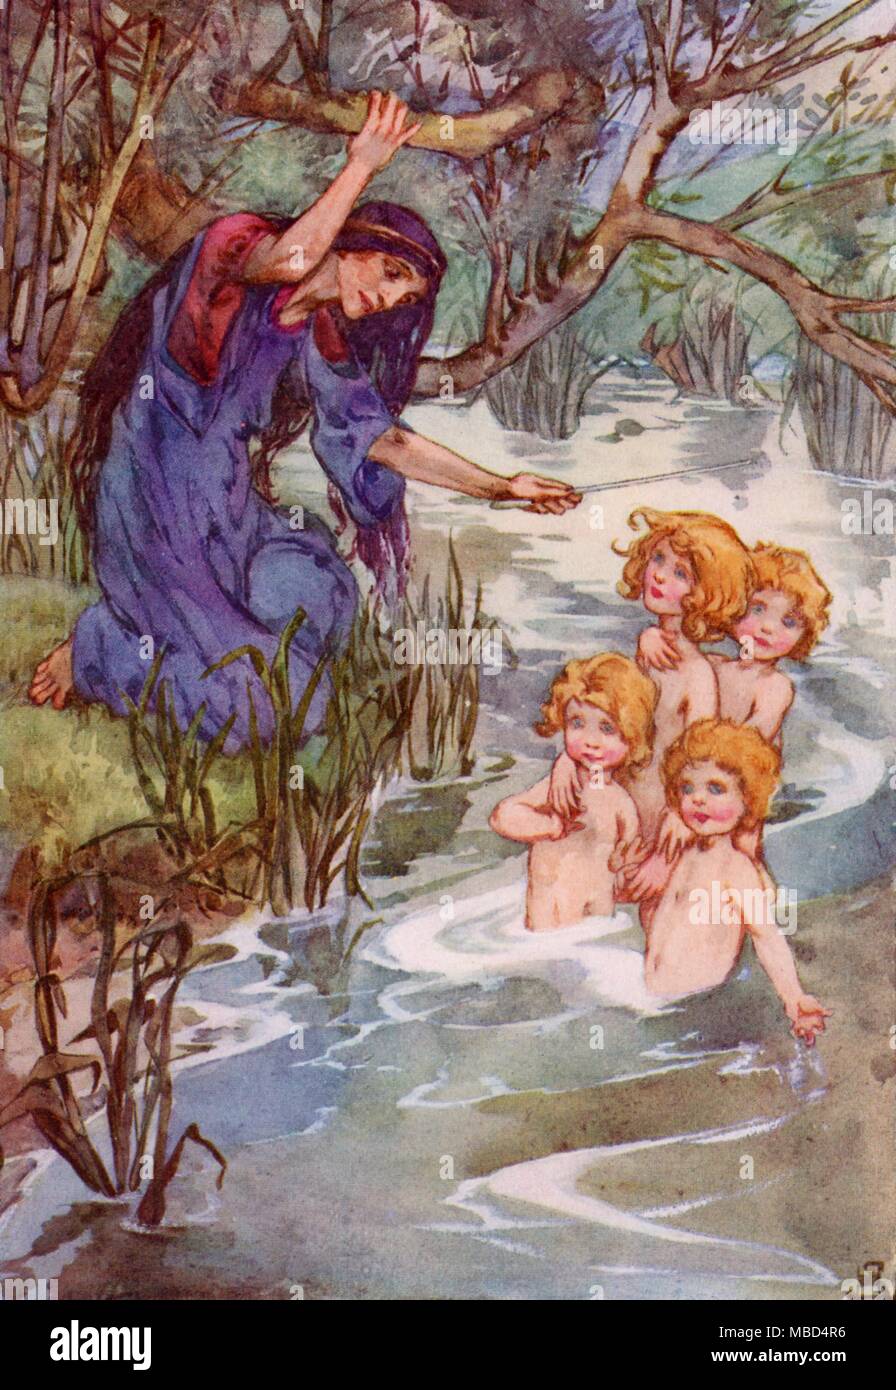 DRUIDS - RUNES Eva chanting runes, and waving the magical Druidic want, to bewitch the children of Lir. 'One touch for each, with a magical wand of the Druids' - Illustration by Helen Stratton, A Book of Myths (1915). Stock Photo